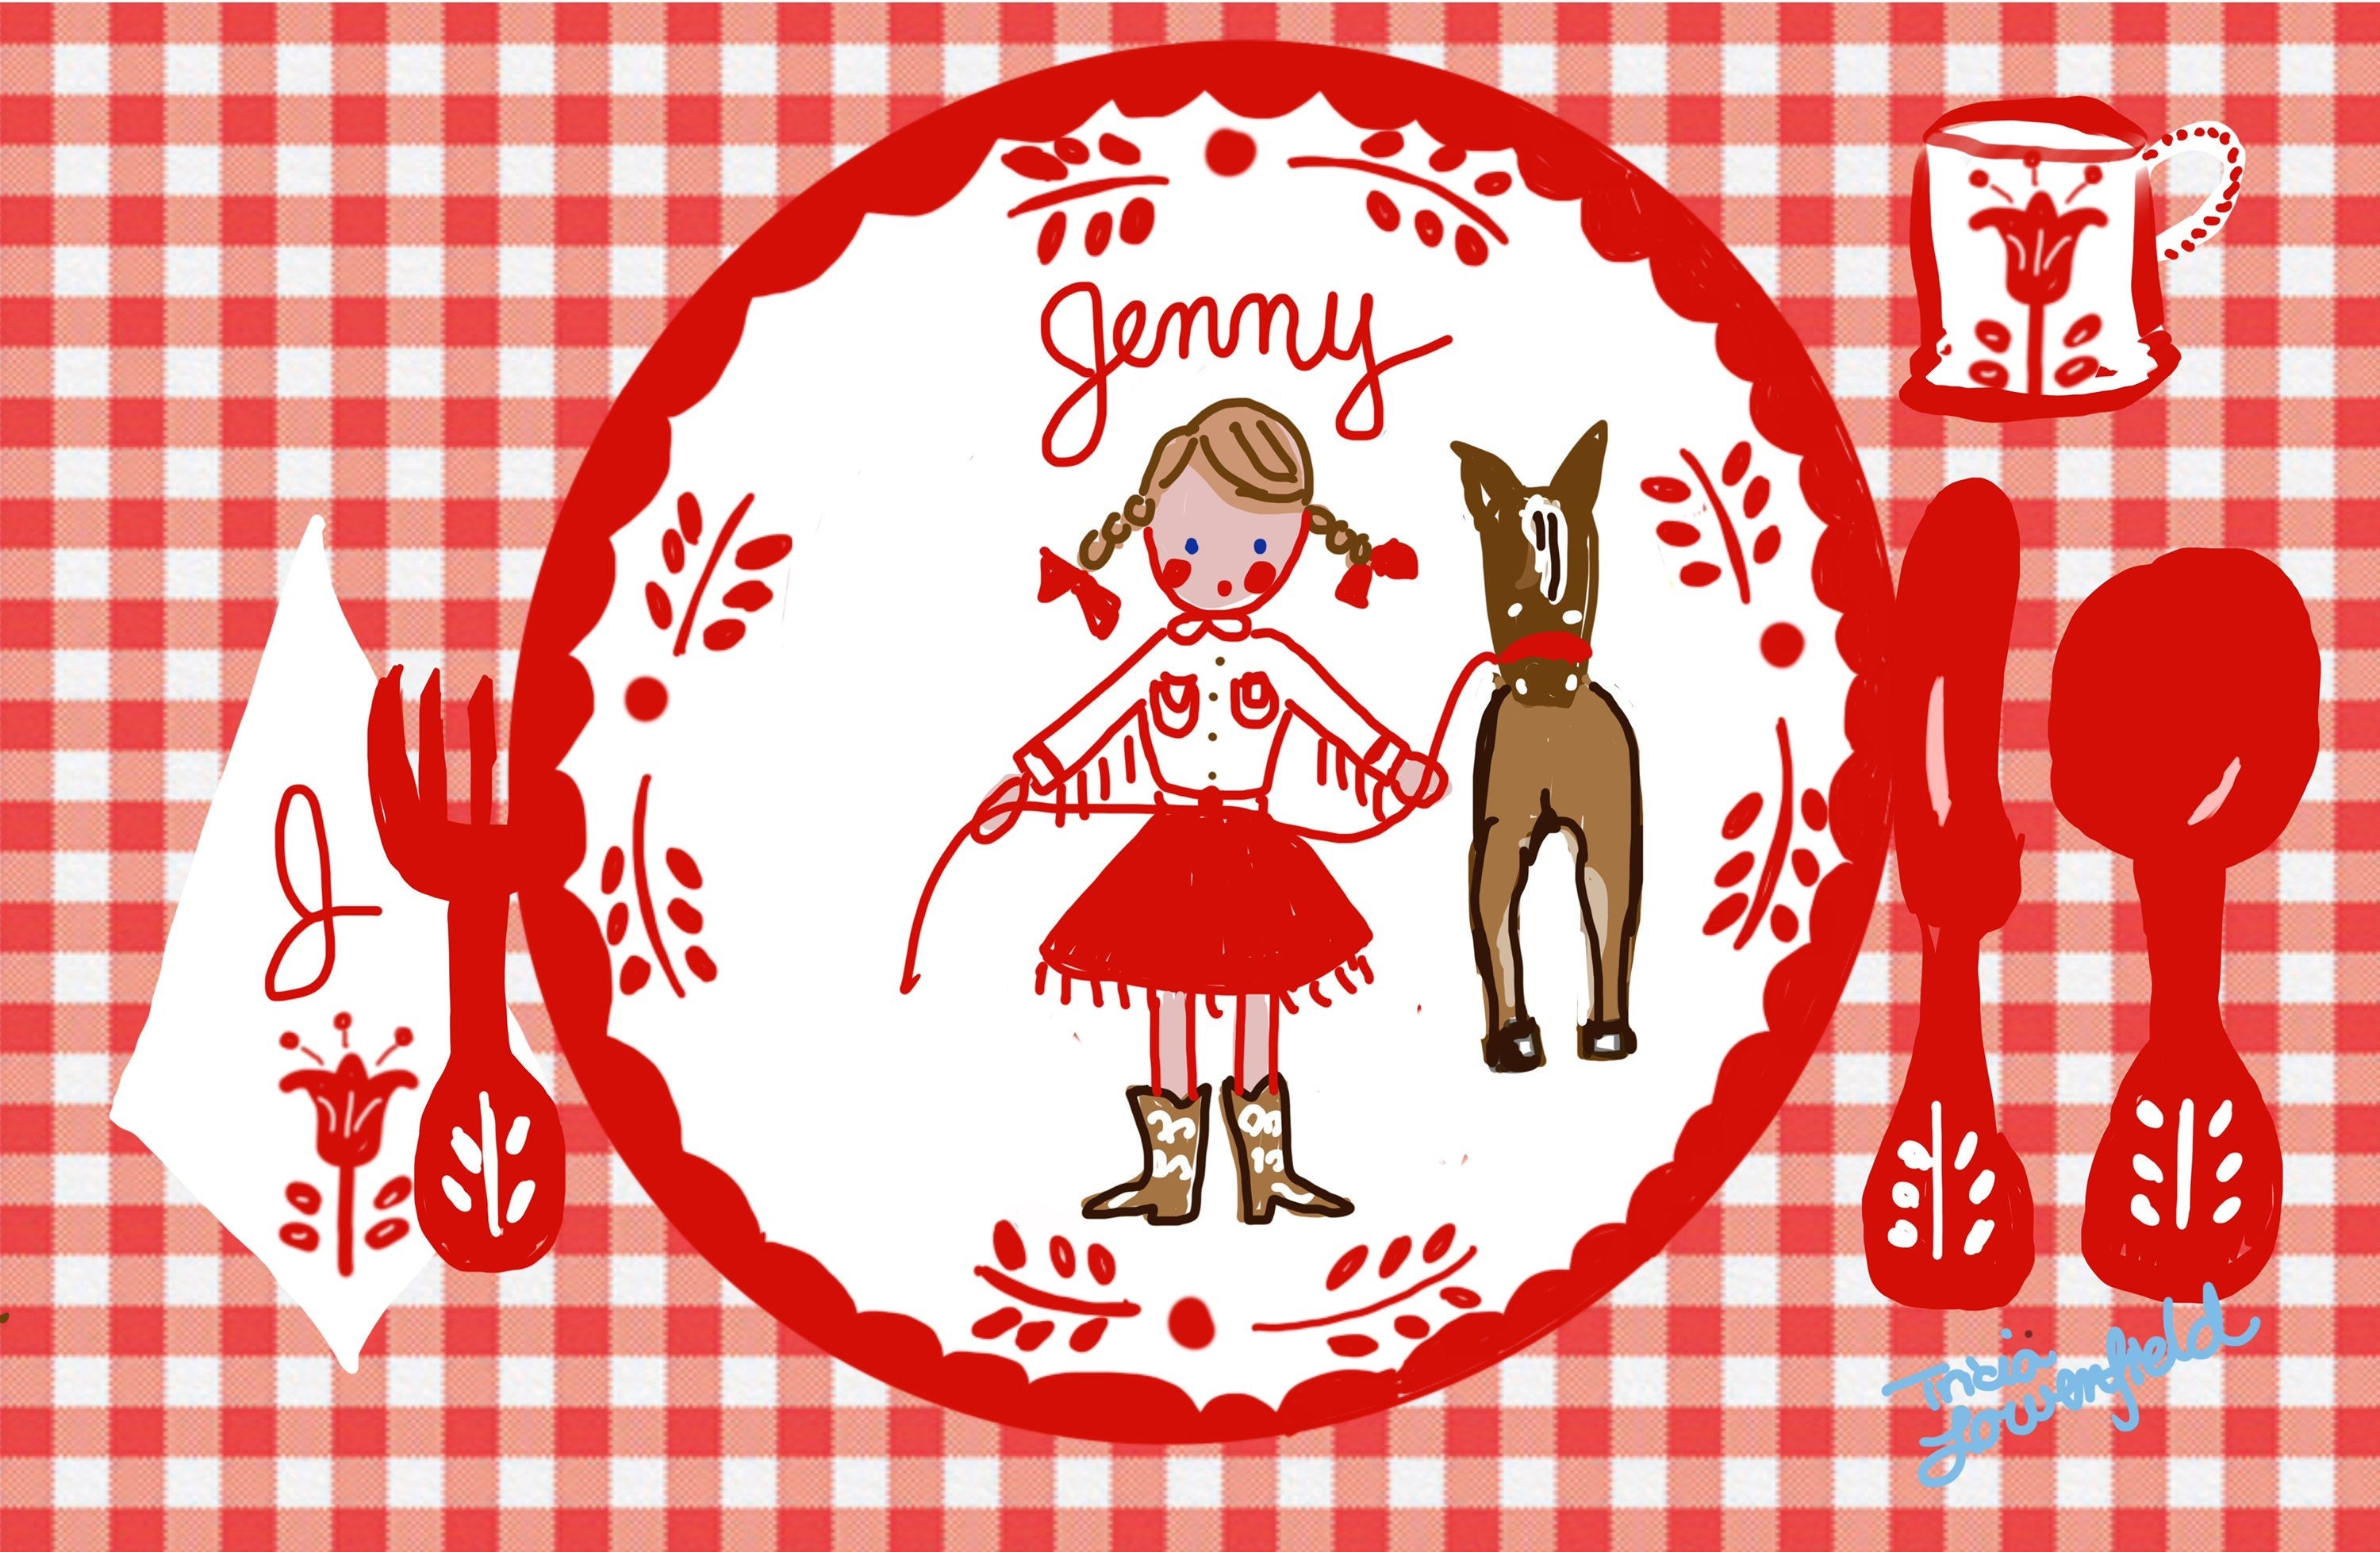 Laminated Placemat - Cowgirl - Tricia Lowenfield Design